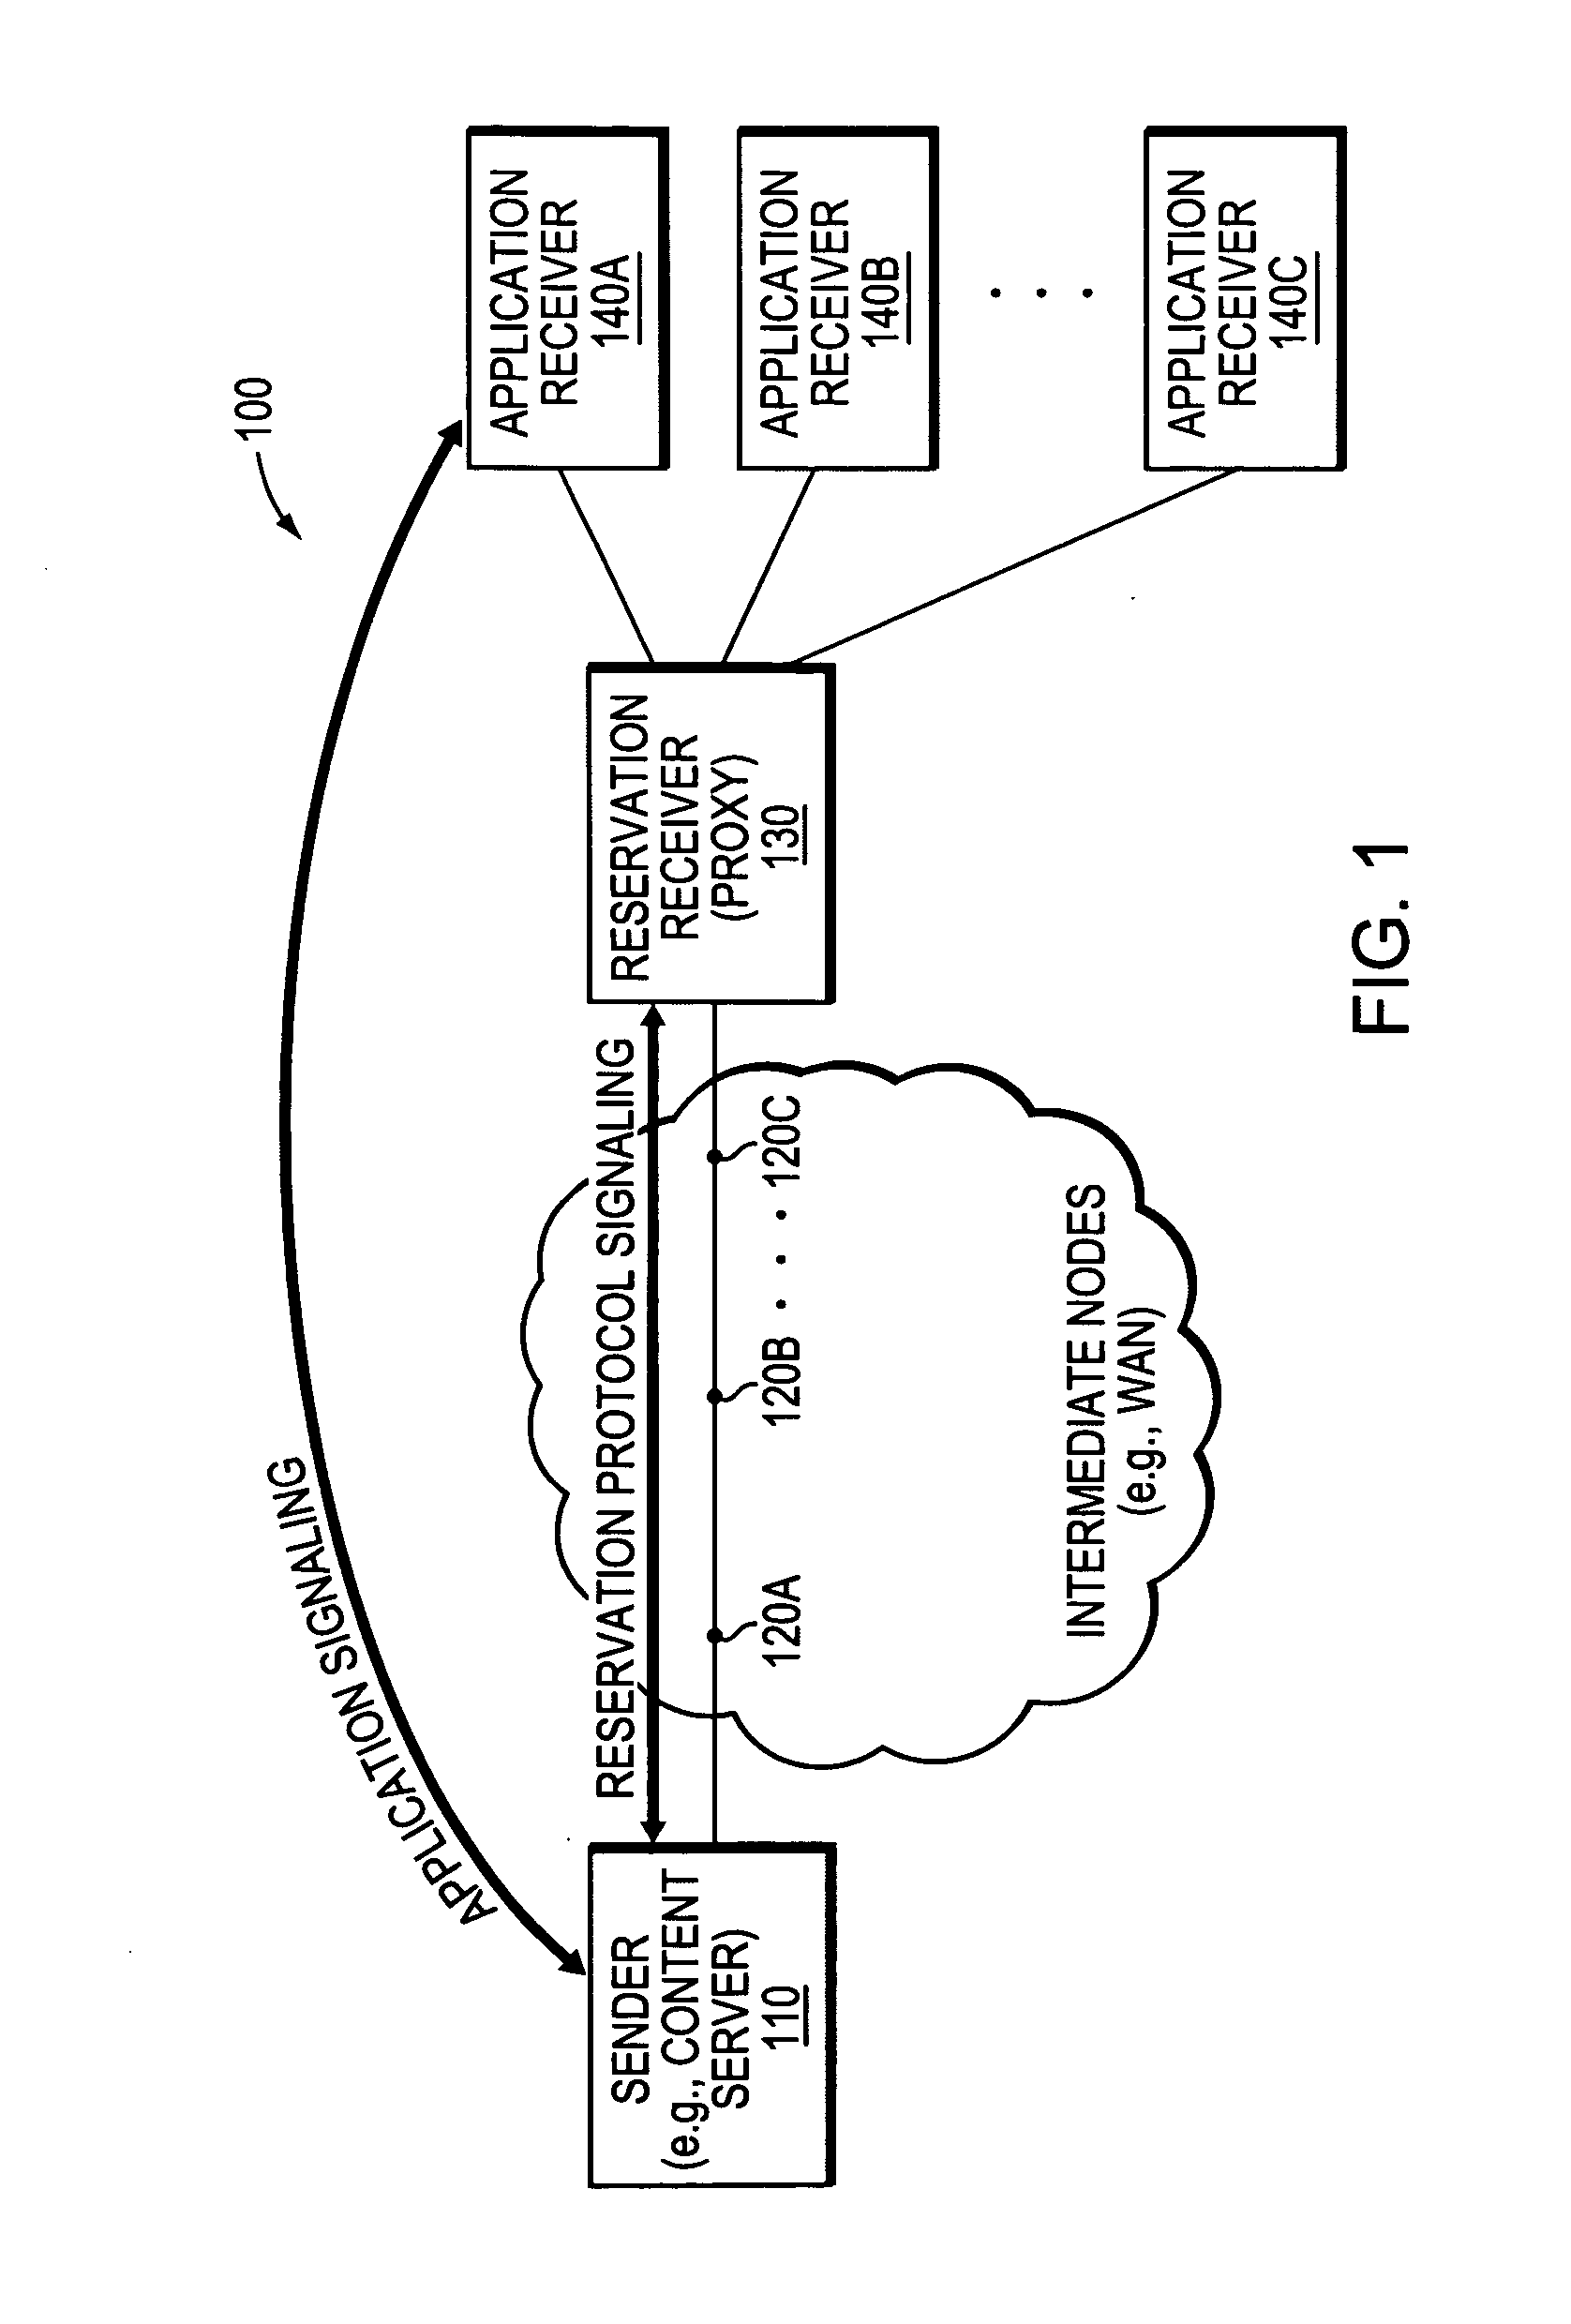 Facilitating application synchronization with a reservation protocol at a sender without application receiver participation